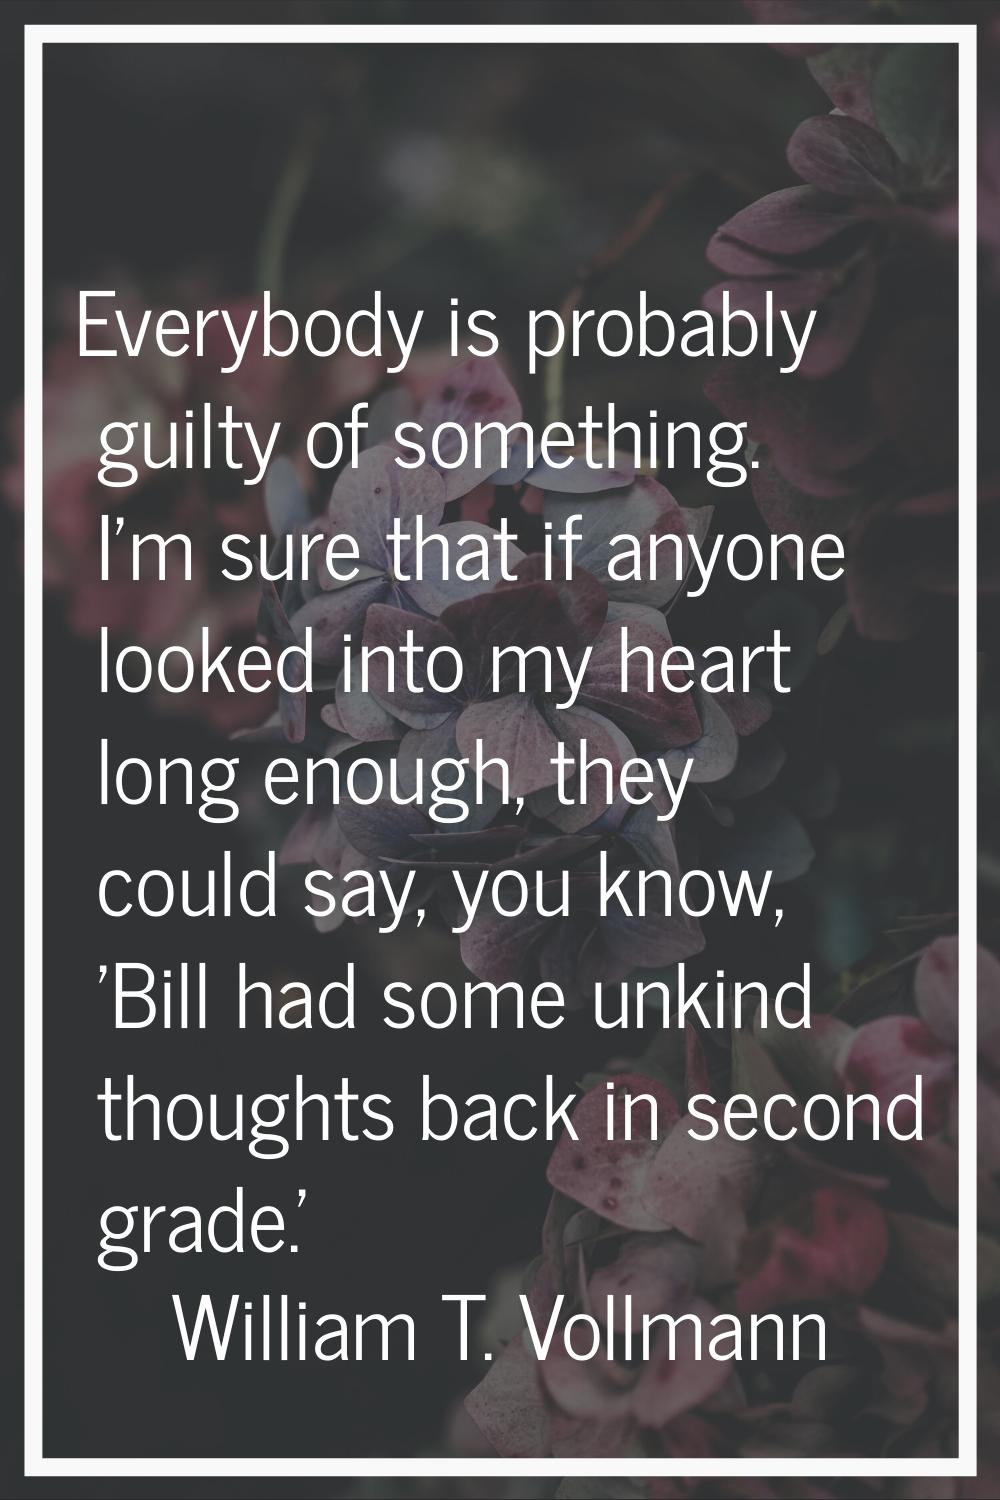 Everybody is probably guilty of something. I'm sure that if anyone looked into my heart long enough